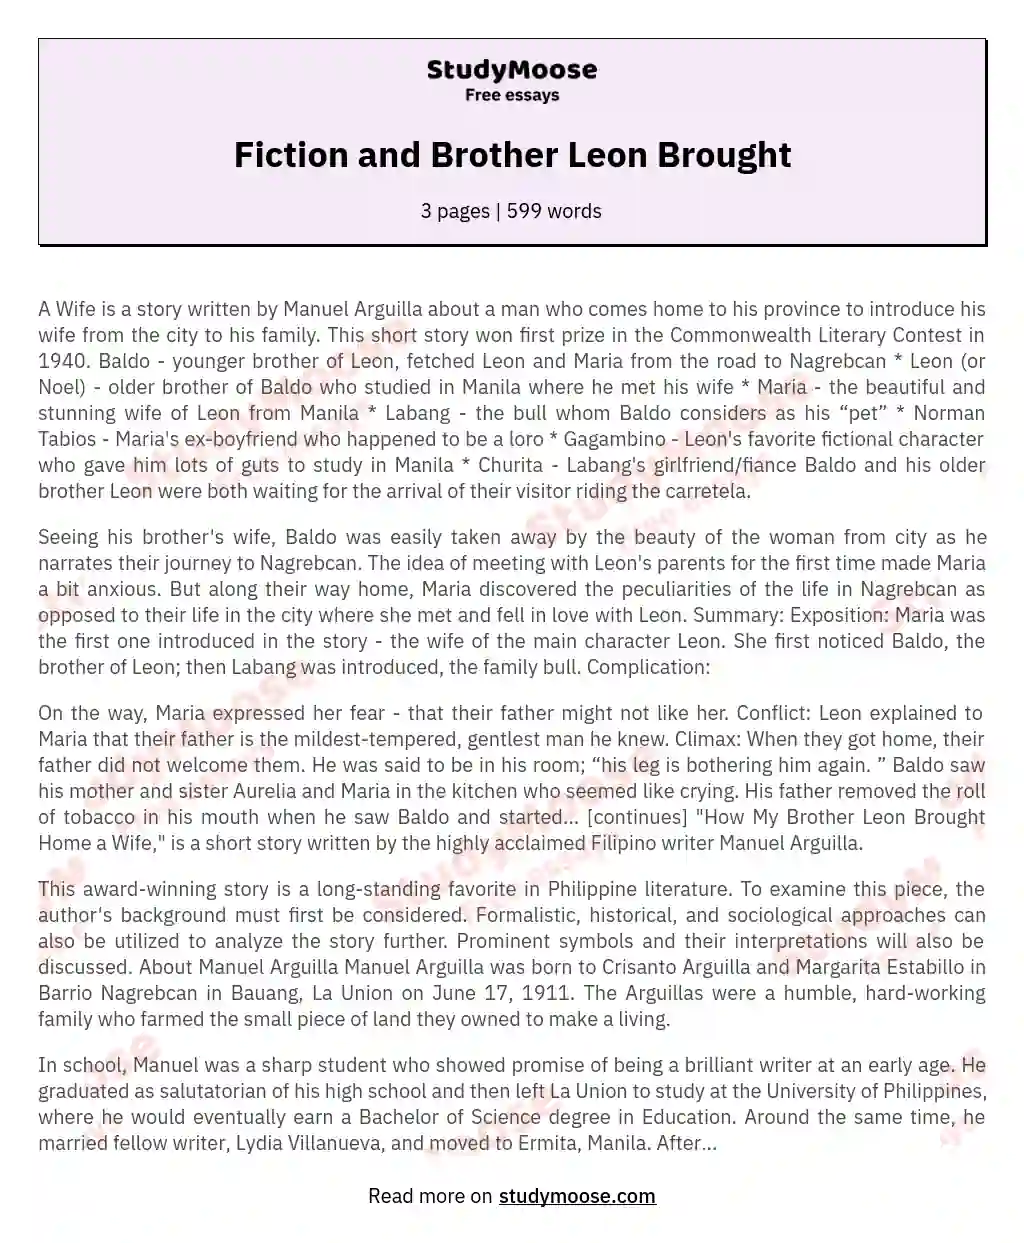 Fiction and Brother Leon Brought